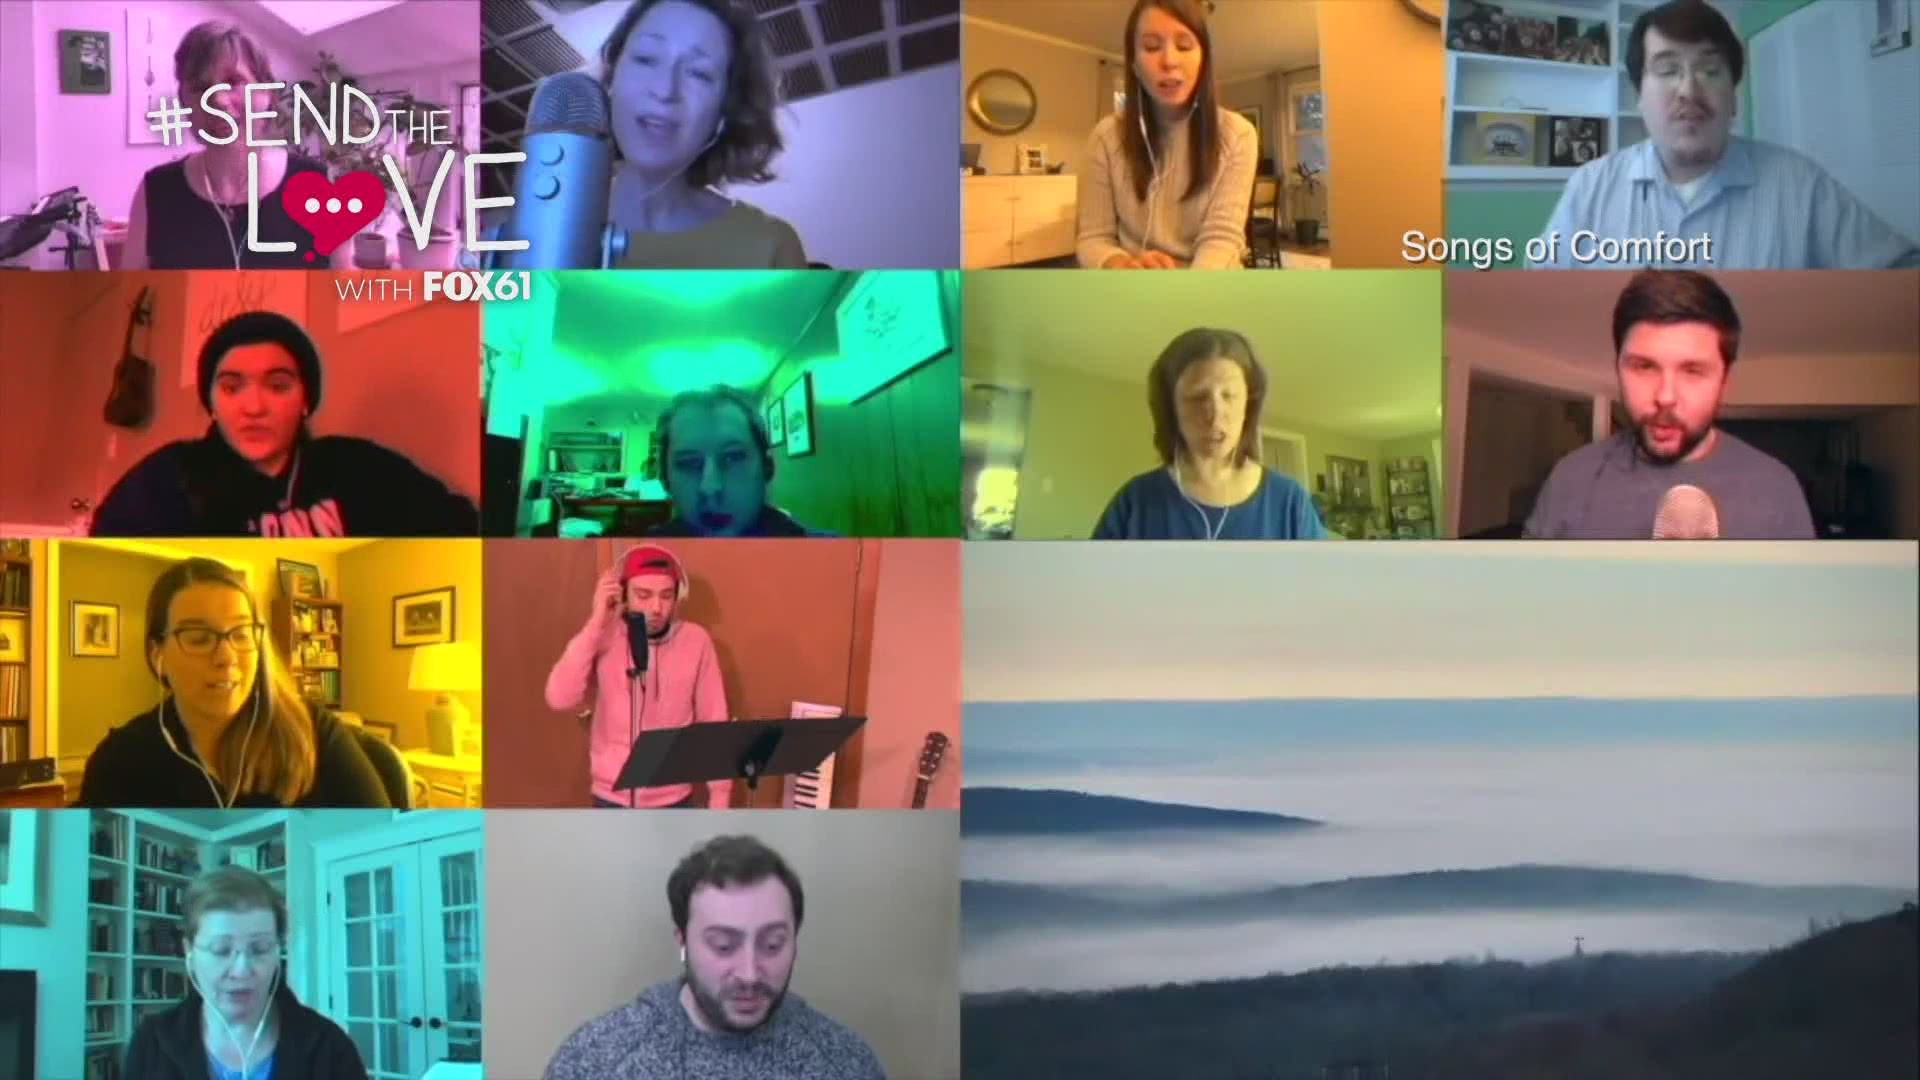 Songs of Comfort is a virtual choir made up of 40-50 people singing from homes across Connecticut.